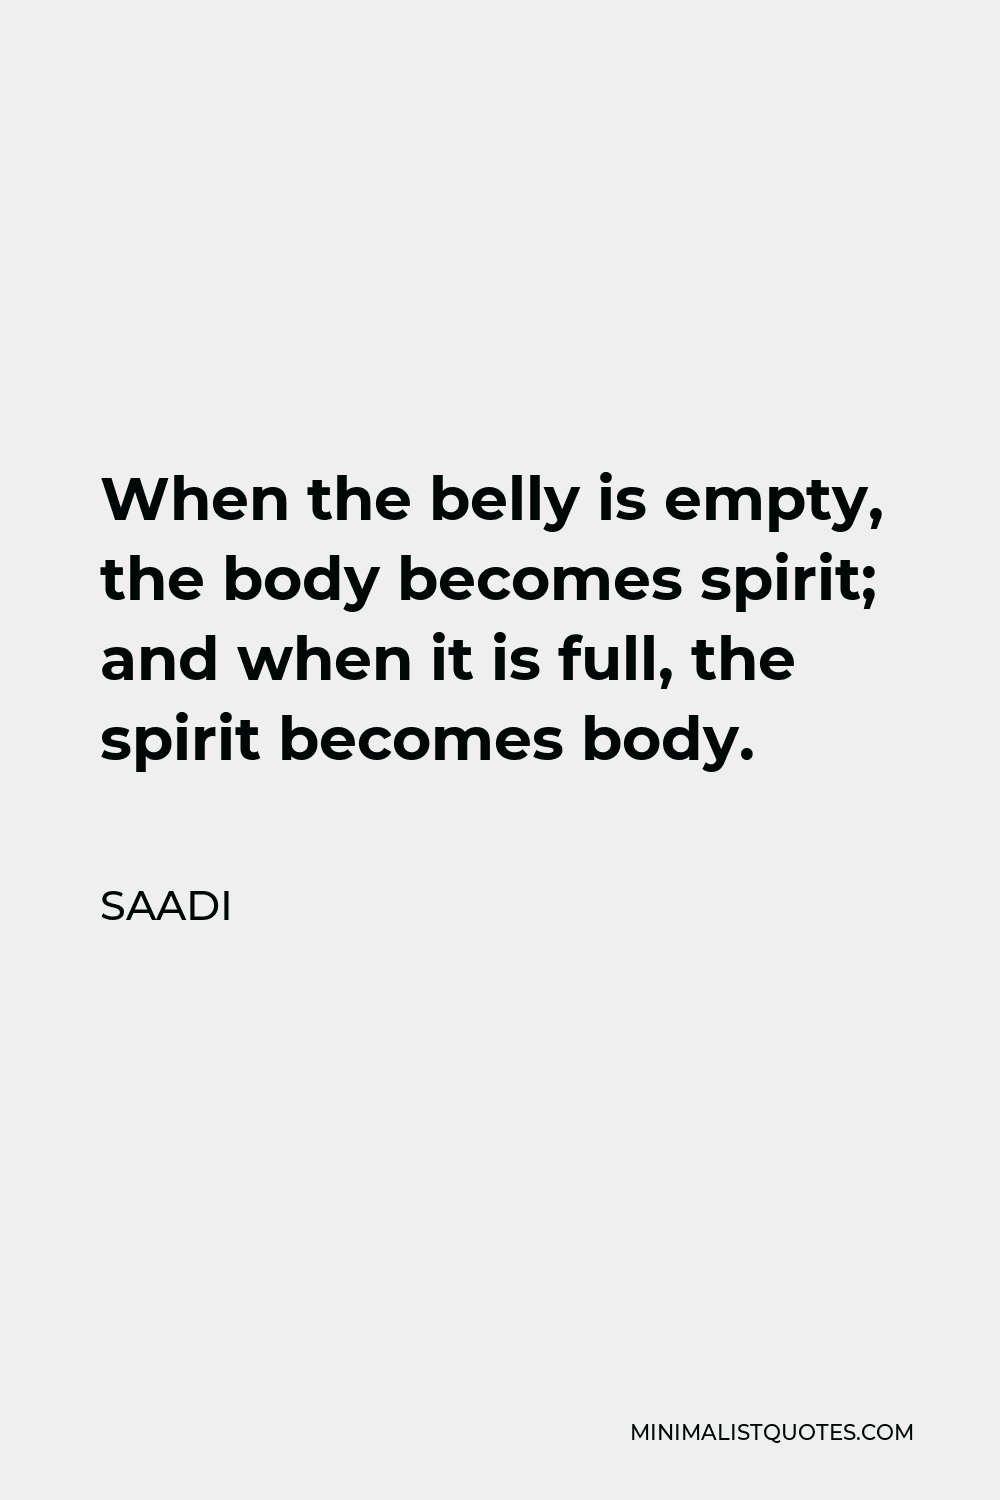 Saadi Quote - When the belly is empty, the body becomes spirit; and when it is full, the spirit becomes body.